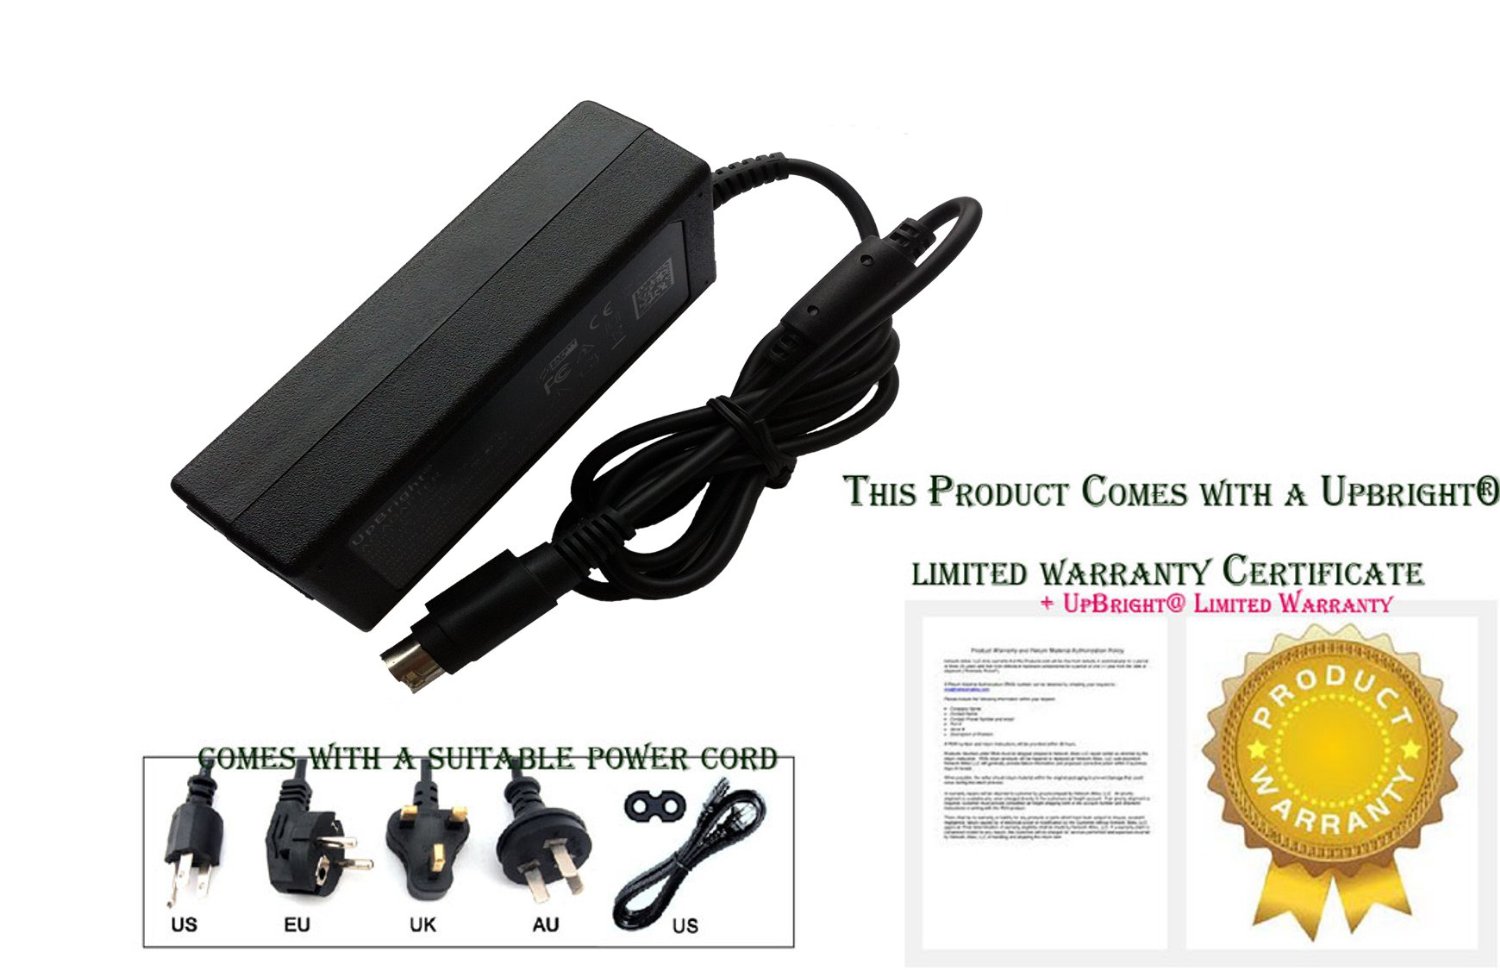 UpBright® NEW AC / DC Adapter For BIXOLON SRP-350plusII SRP-350 Plus II 2 SRP-350plusC SRP-350plus C SRP-350plusII COSG/USA SRP-350plusIICOSG/USA Samsung Thermal Receipt Printer DC Power Supply Cord Cable PS Charger Input: 100 - 240 VAC 50/60Hz Worldwide Voltage Use Mains PSU